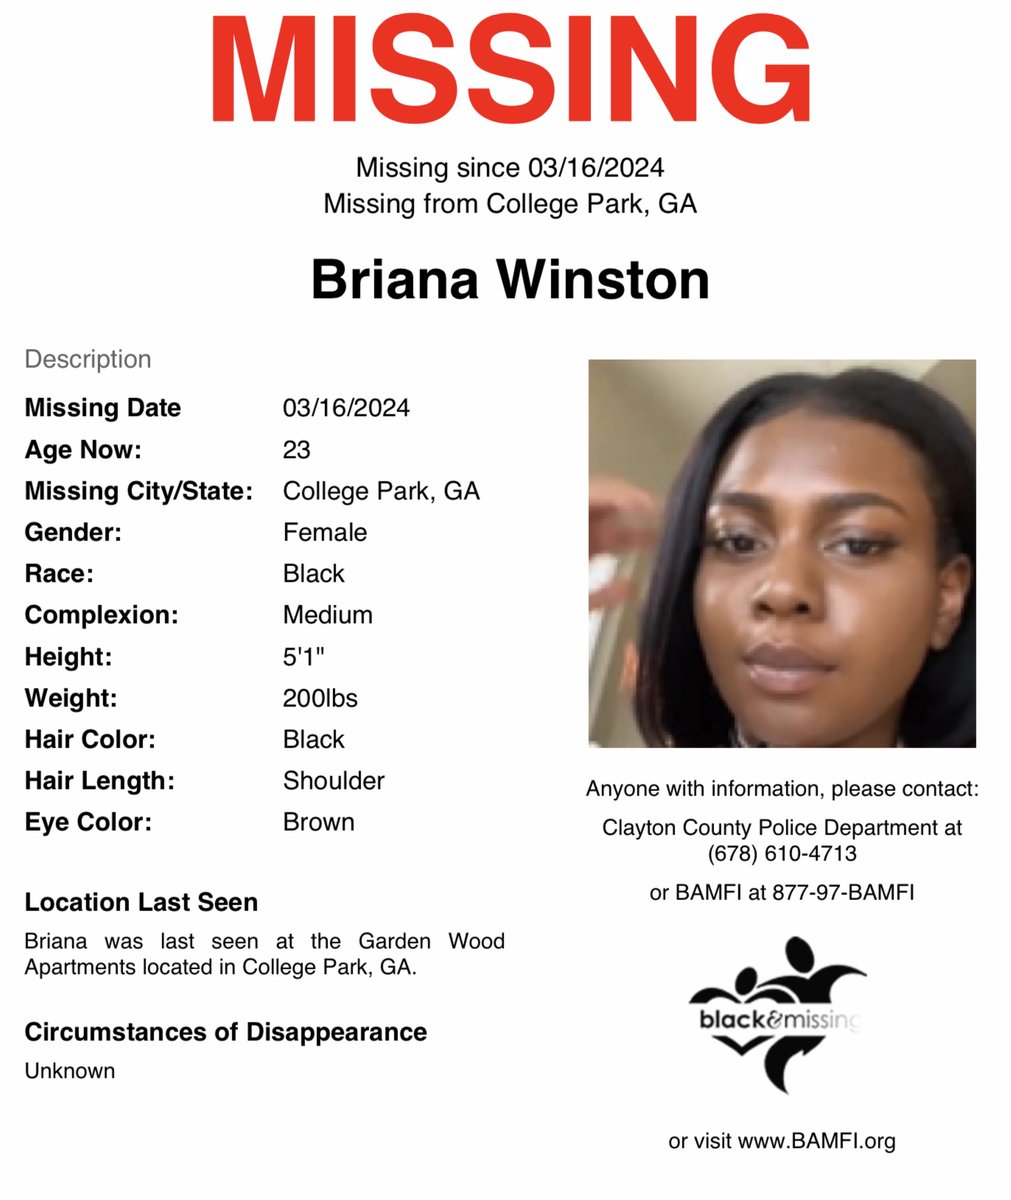 #CollegePark, #Georgia: 23y/o Briana Winston was last seen at the Garden Wood Apartments located in College Park. Have you seen Briana? #BrianaWinston